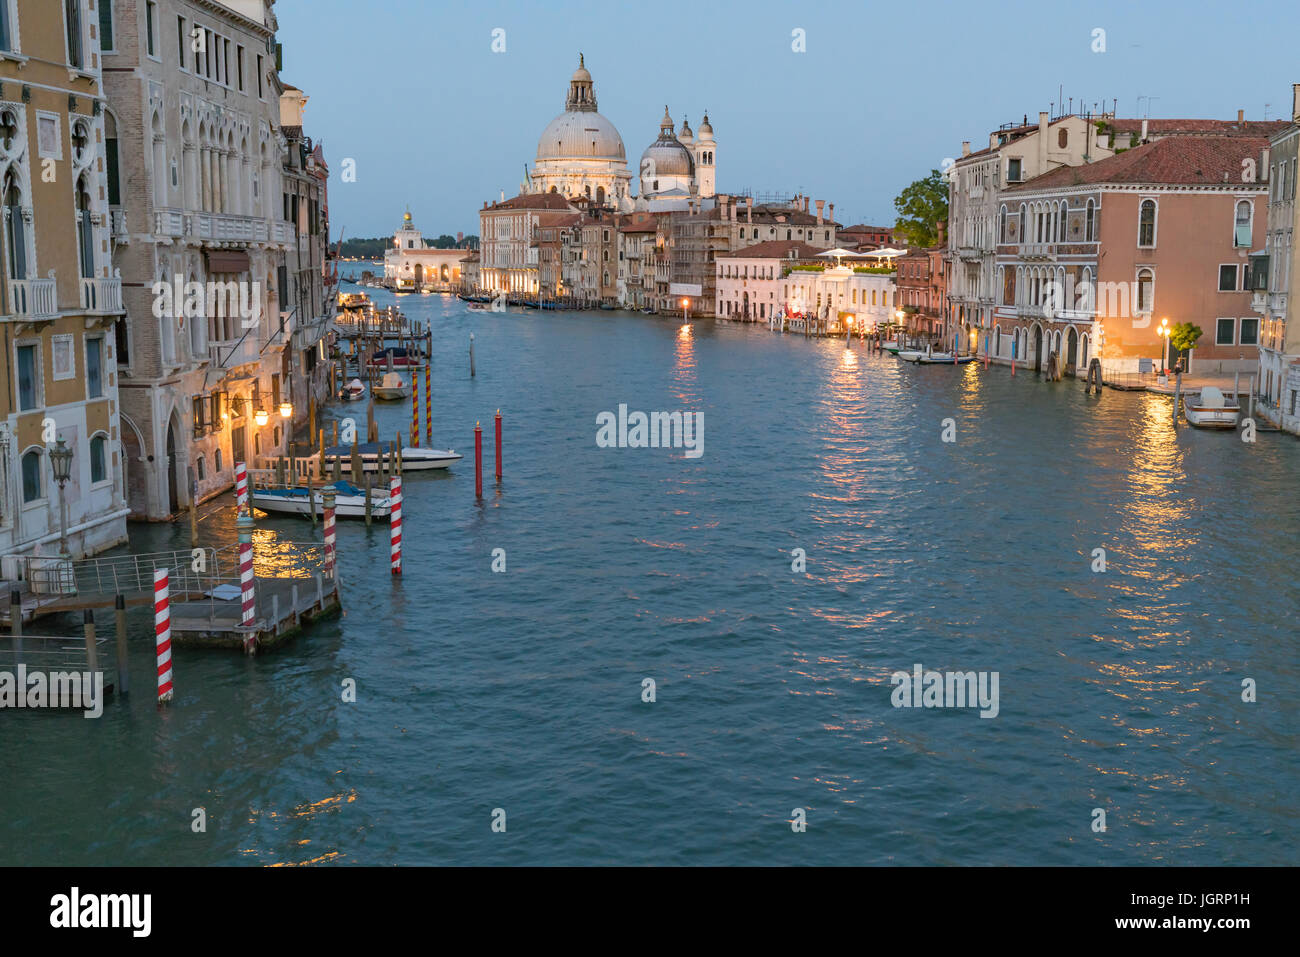 Dusk along the Grand Canal in Venice, Italy Stock Photo